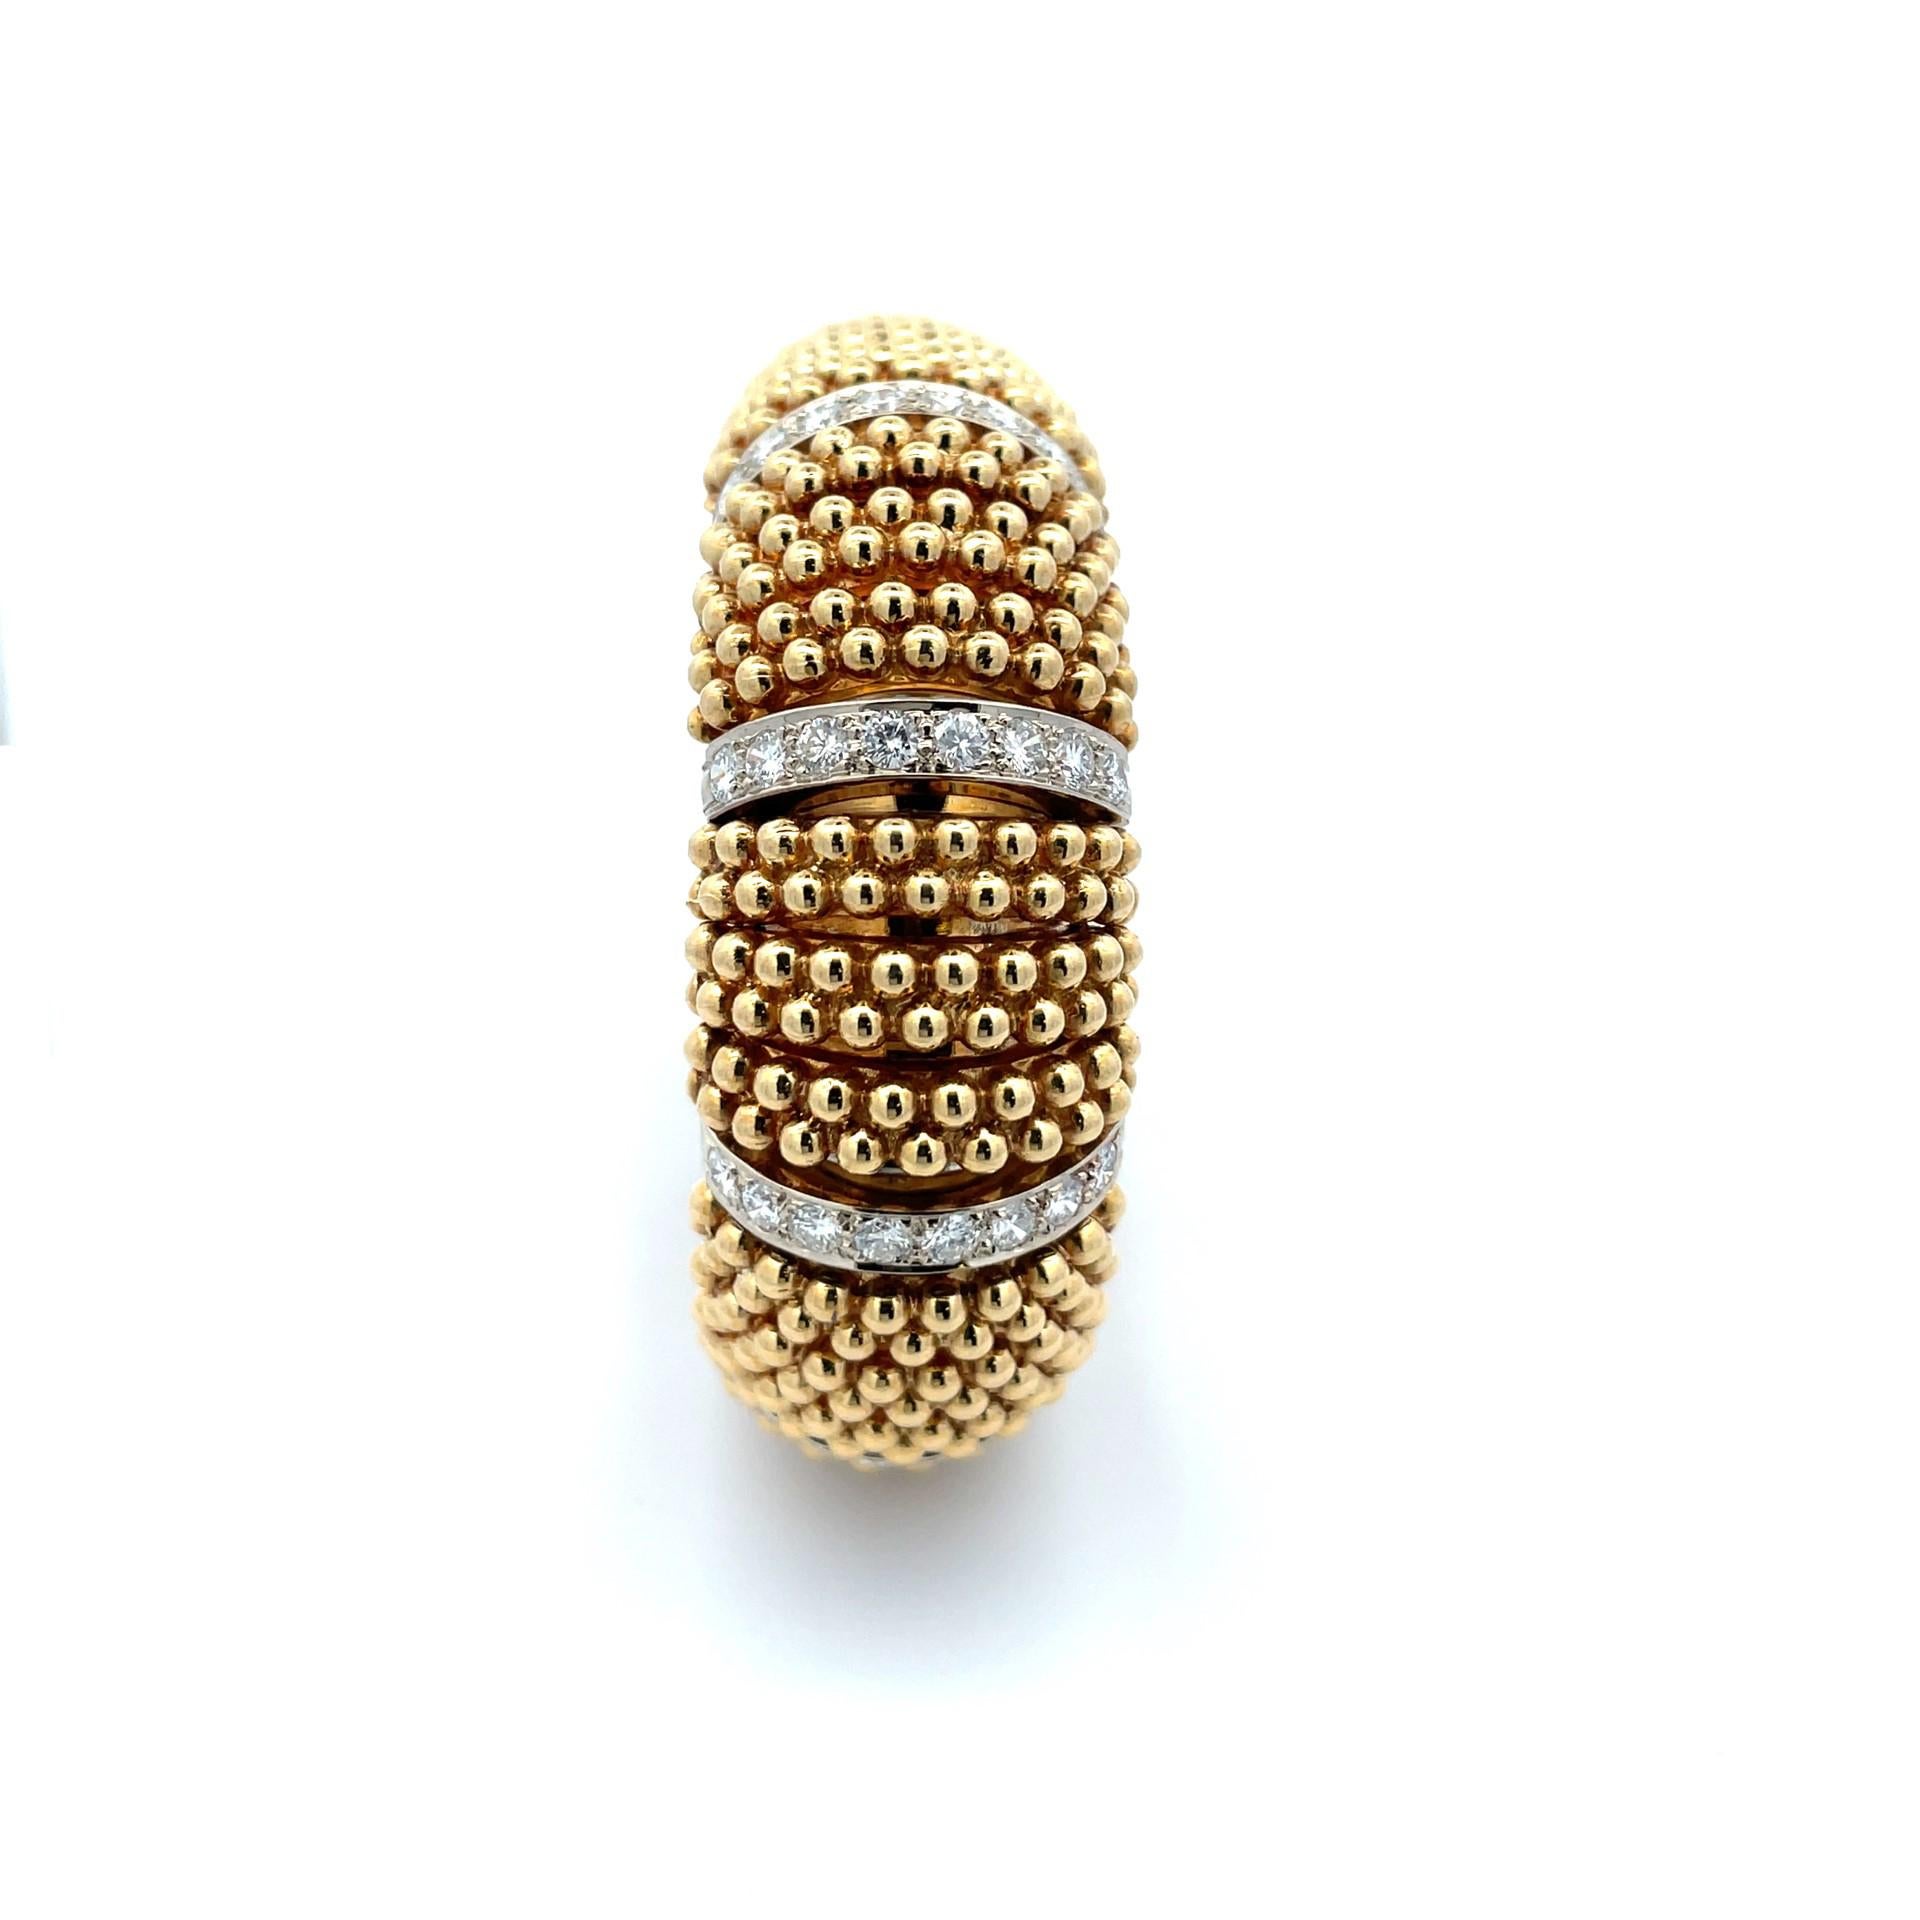 Vintage wide multi rows gold beads and diamond bracelet with yellow gold stations in 18 karat and white gold diamond stations in 14 karat. 

80 brilliant cut diamonds weighing 5.20ct twt

 Gold weighing 91.60 grams

0.75